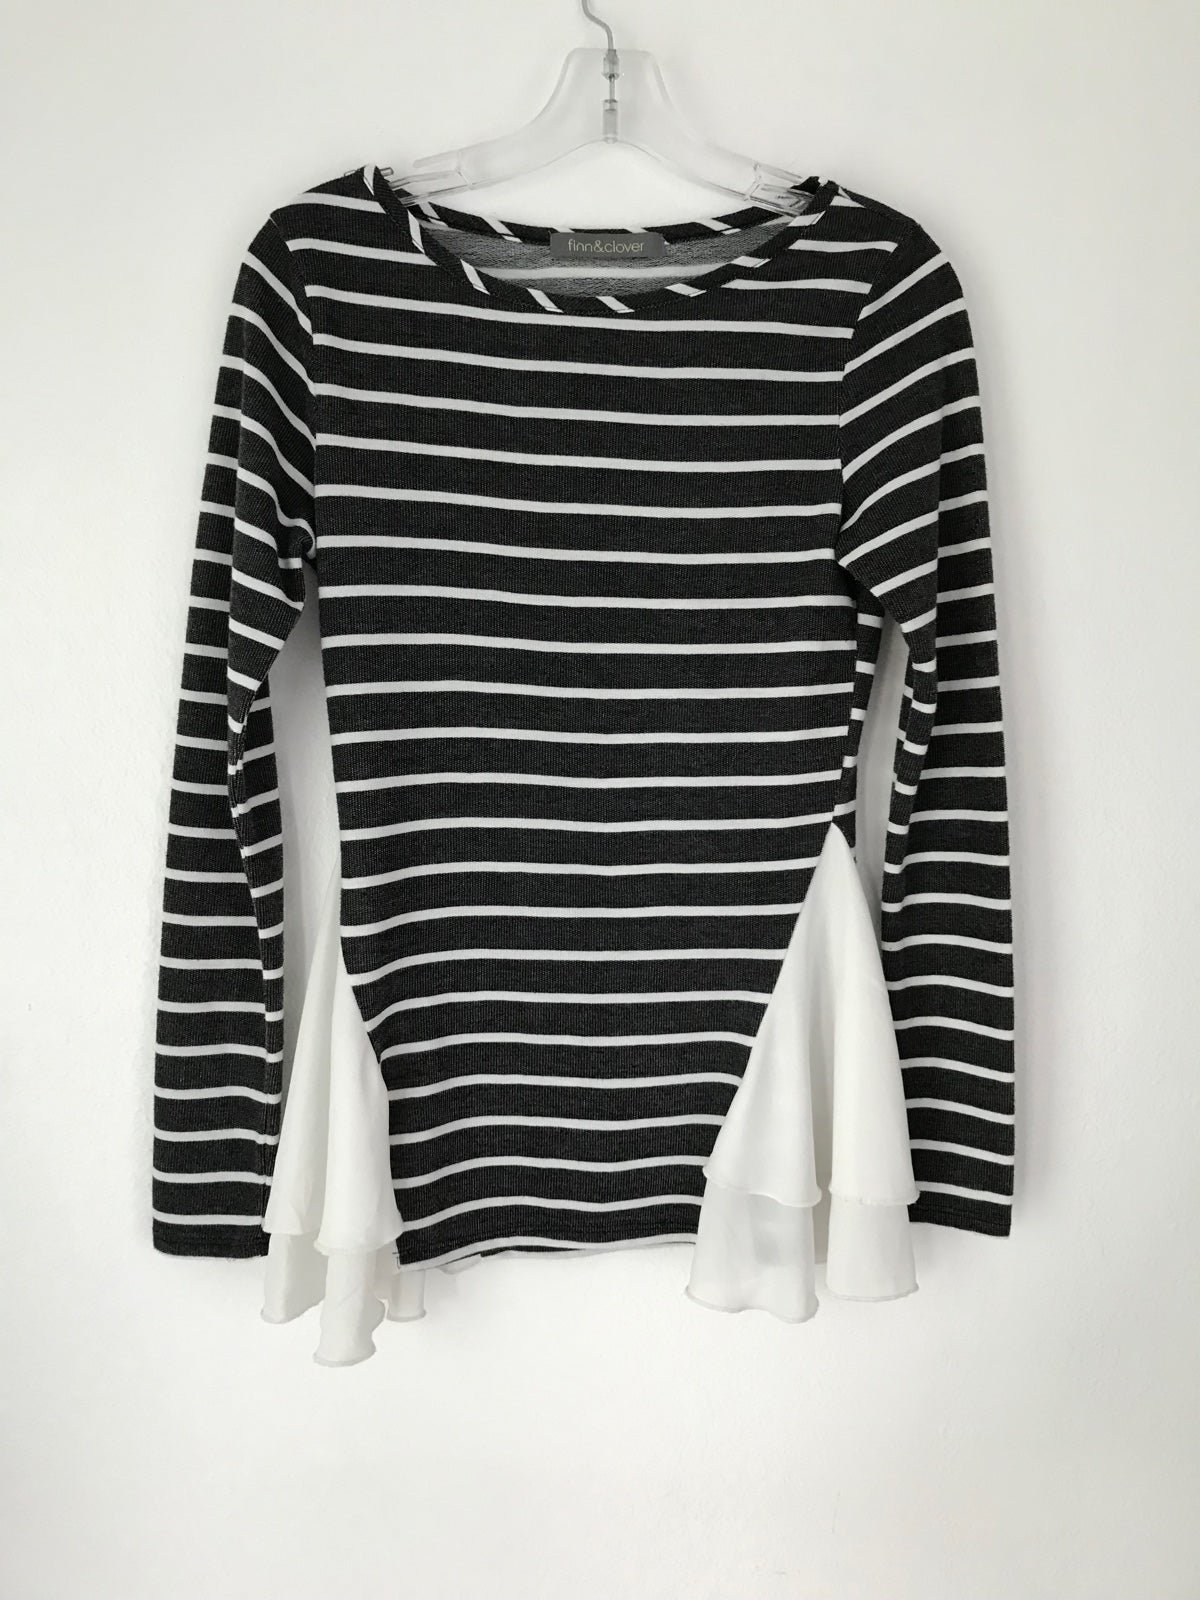 high discount Knit top striped long sleeve gray white women’s fits size small ippI1B0EG Online Shop